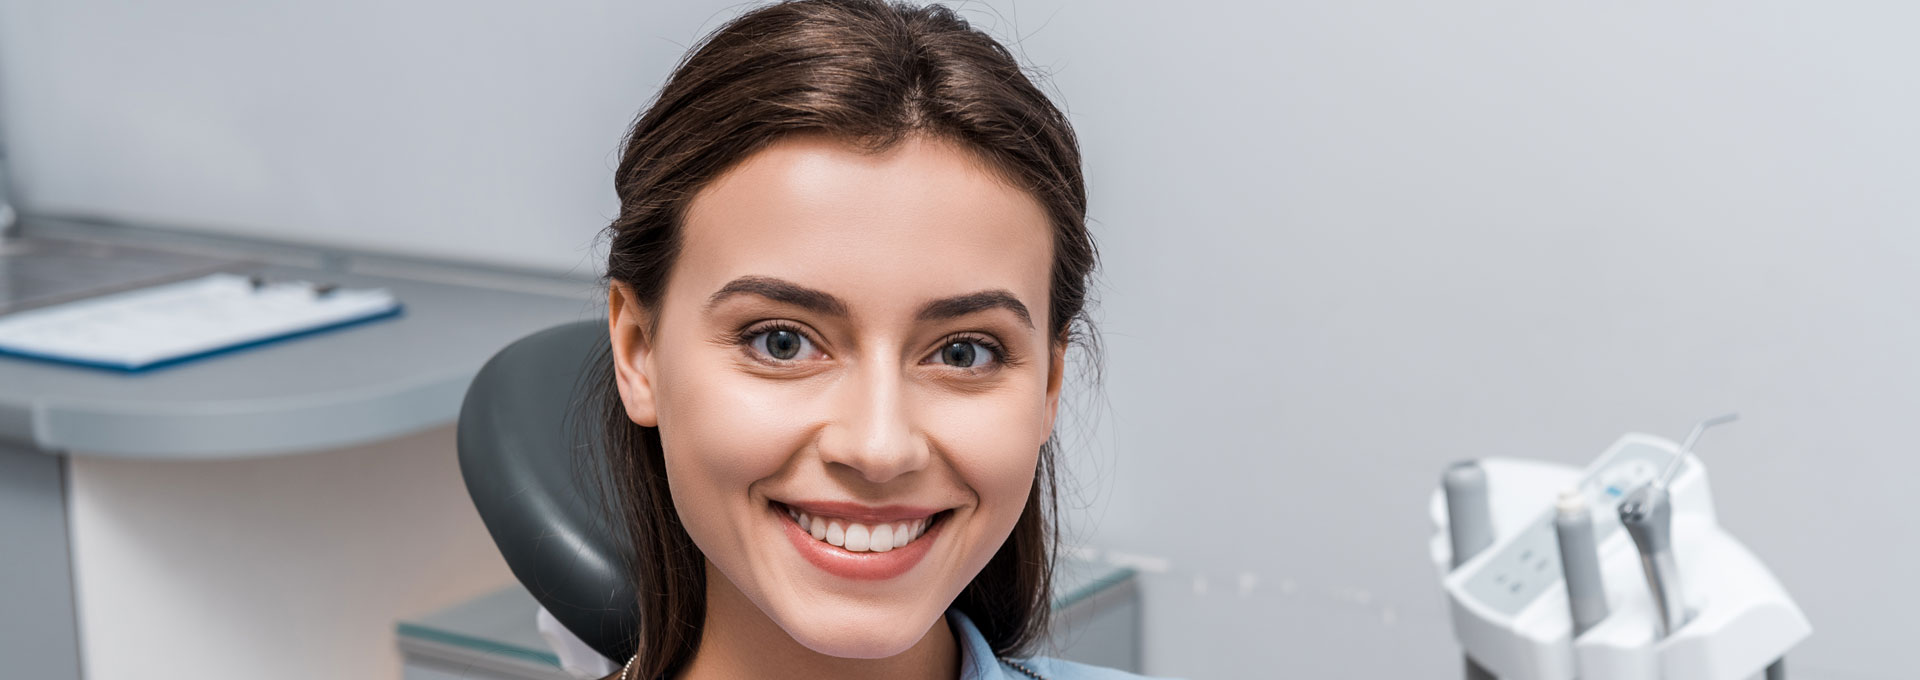 Beautiful woman sitting and smiling in dental clinic